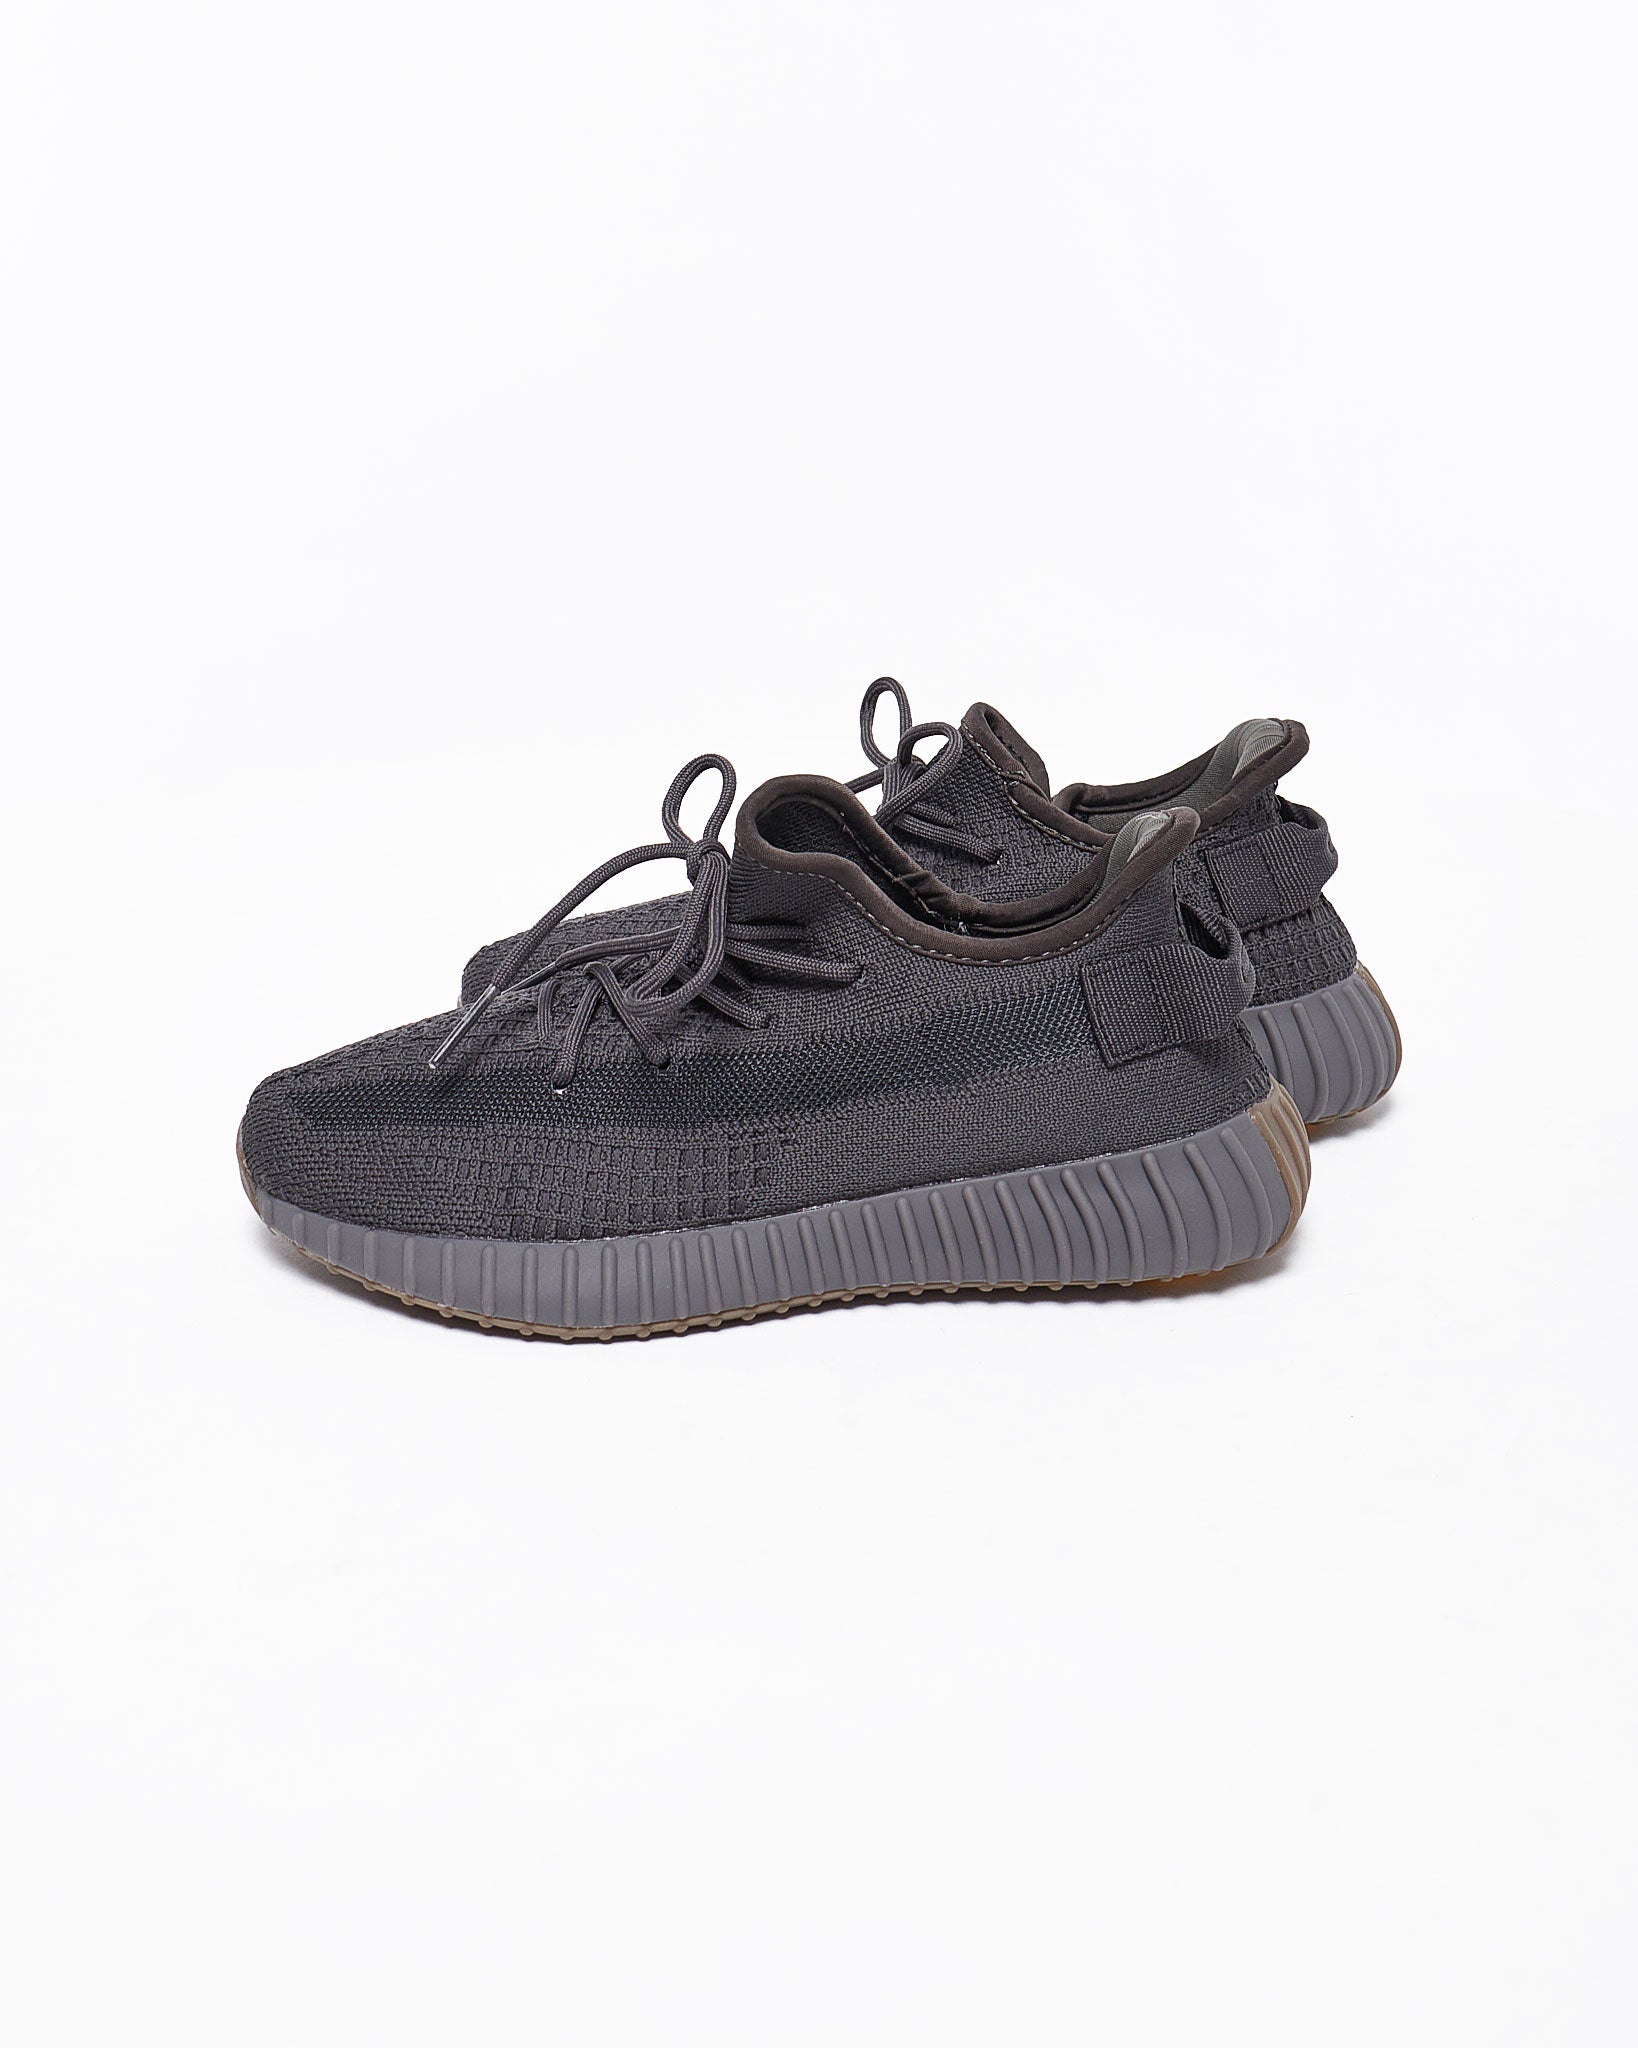 MOI OUTFIT-Yeezy Boost Men Shoes 75.90